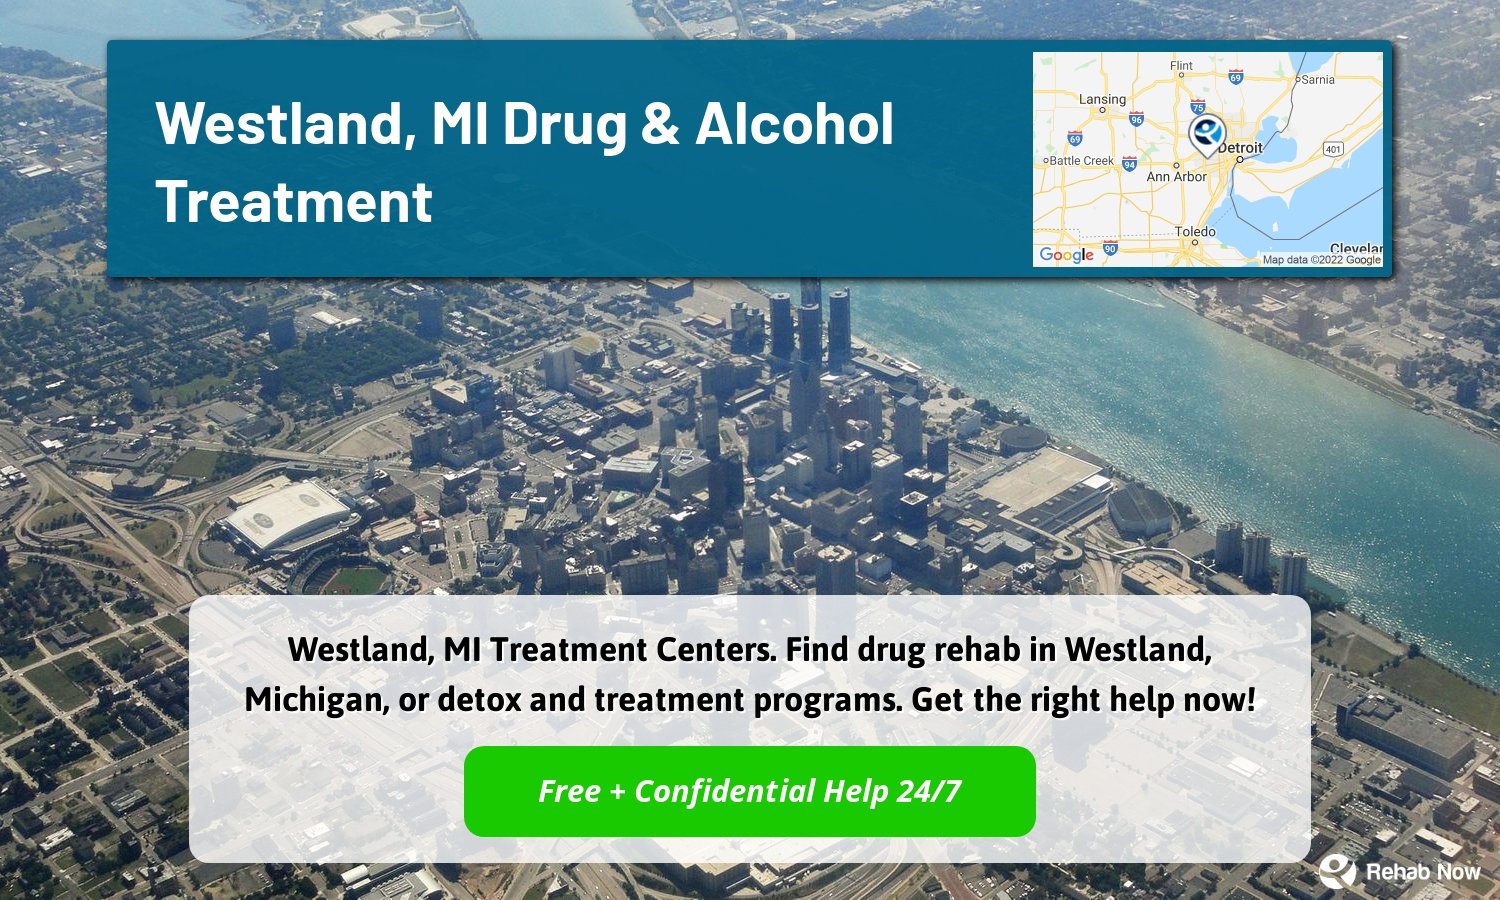 Westland, MI Treatment Centers. Find drug rehab in Westland, Michigan, or detox and treatment programs. Get the right help now!